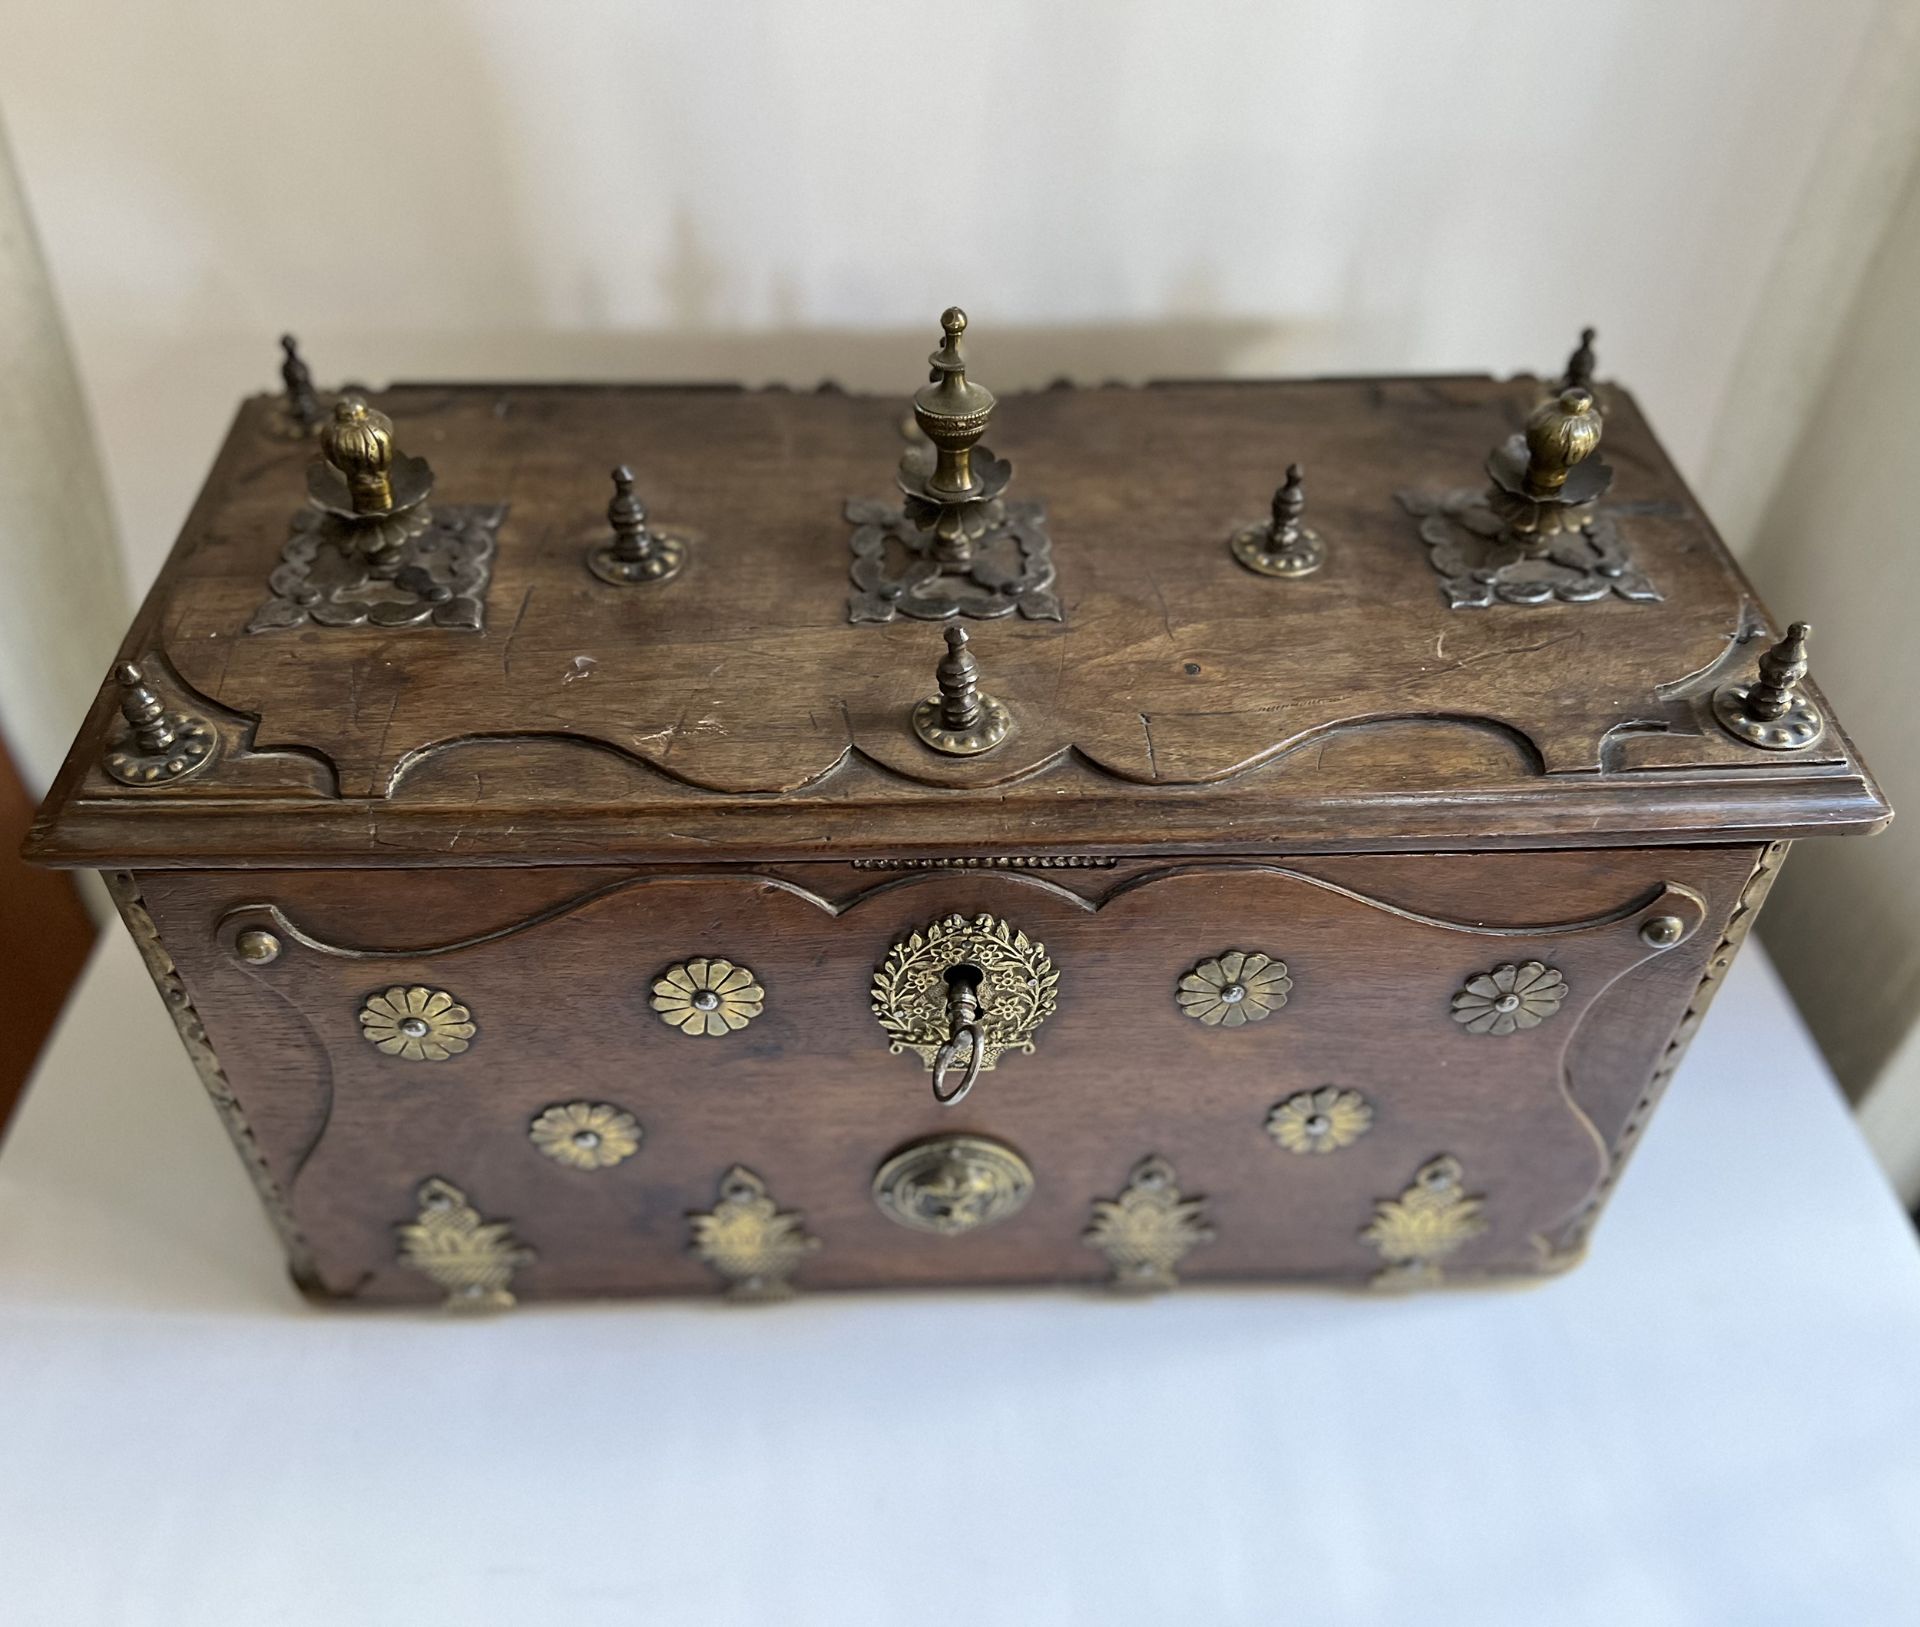 Rare Indian Colonial chest in teak and Bronze Pavilion appliqués, Gujarat, 18th century - Image 3 of 8